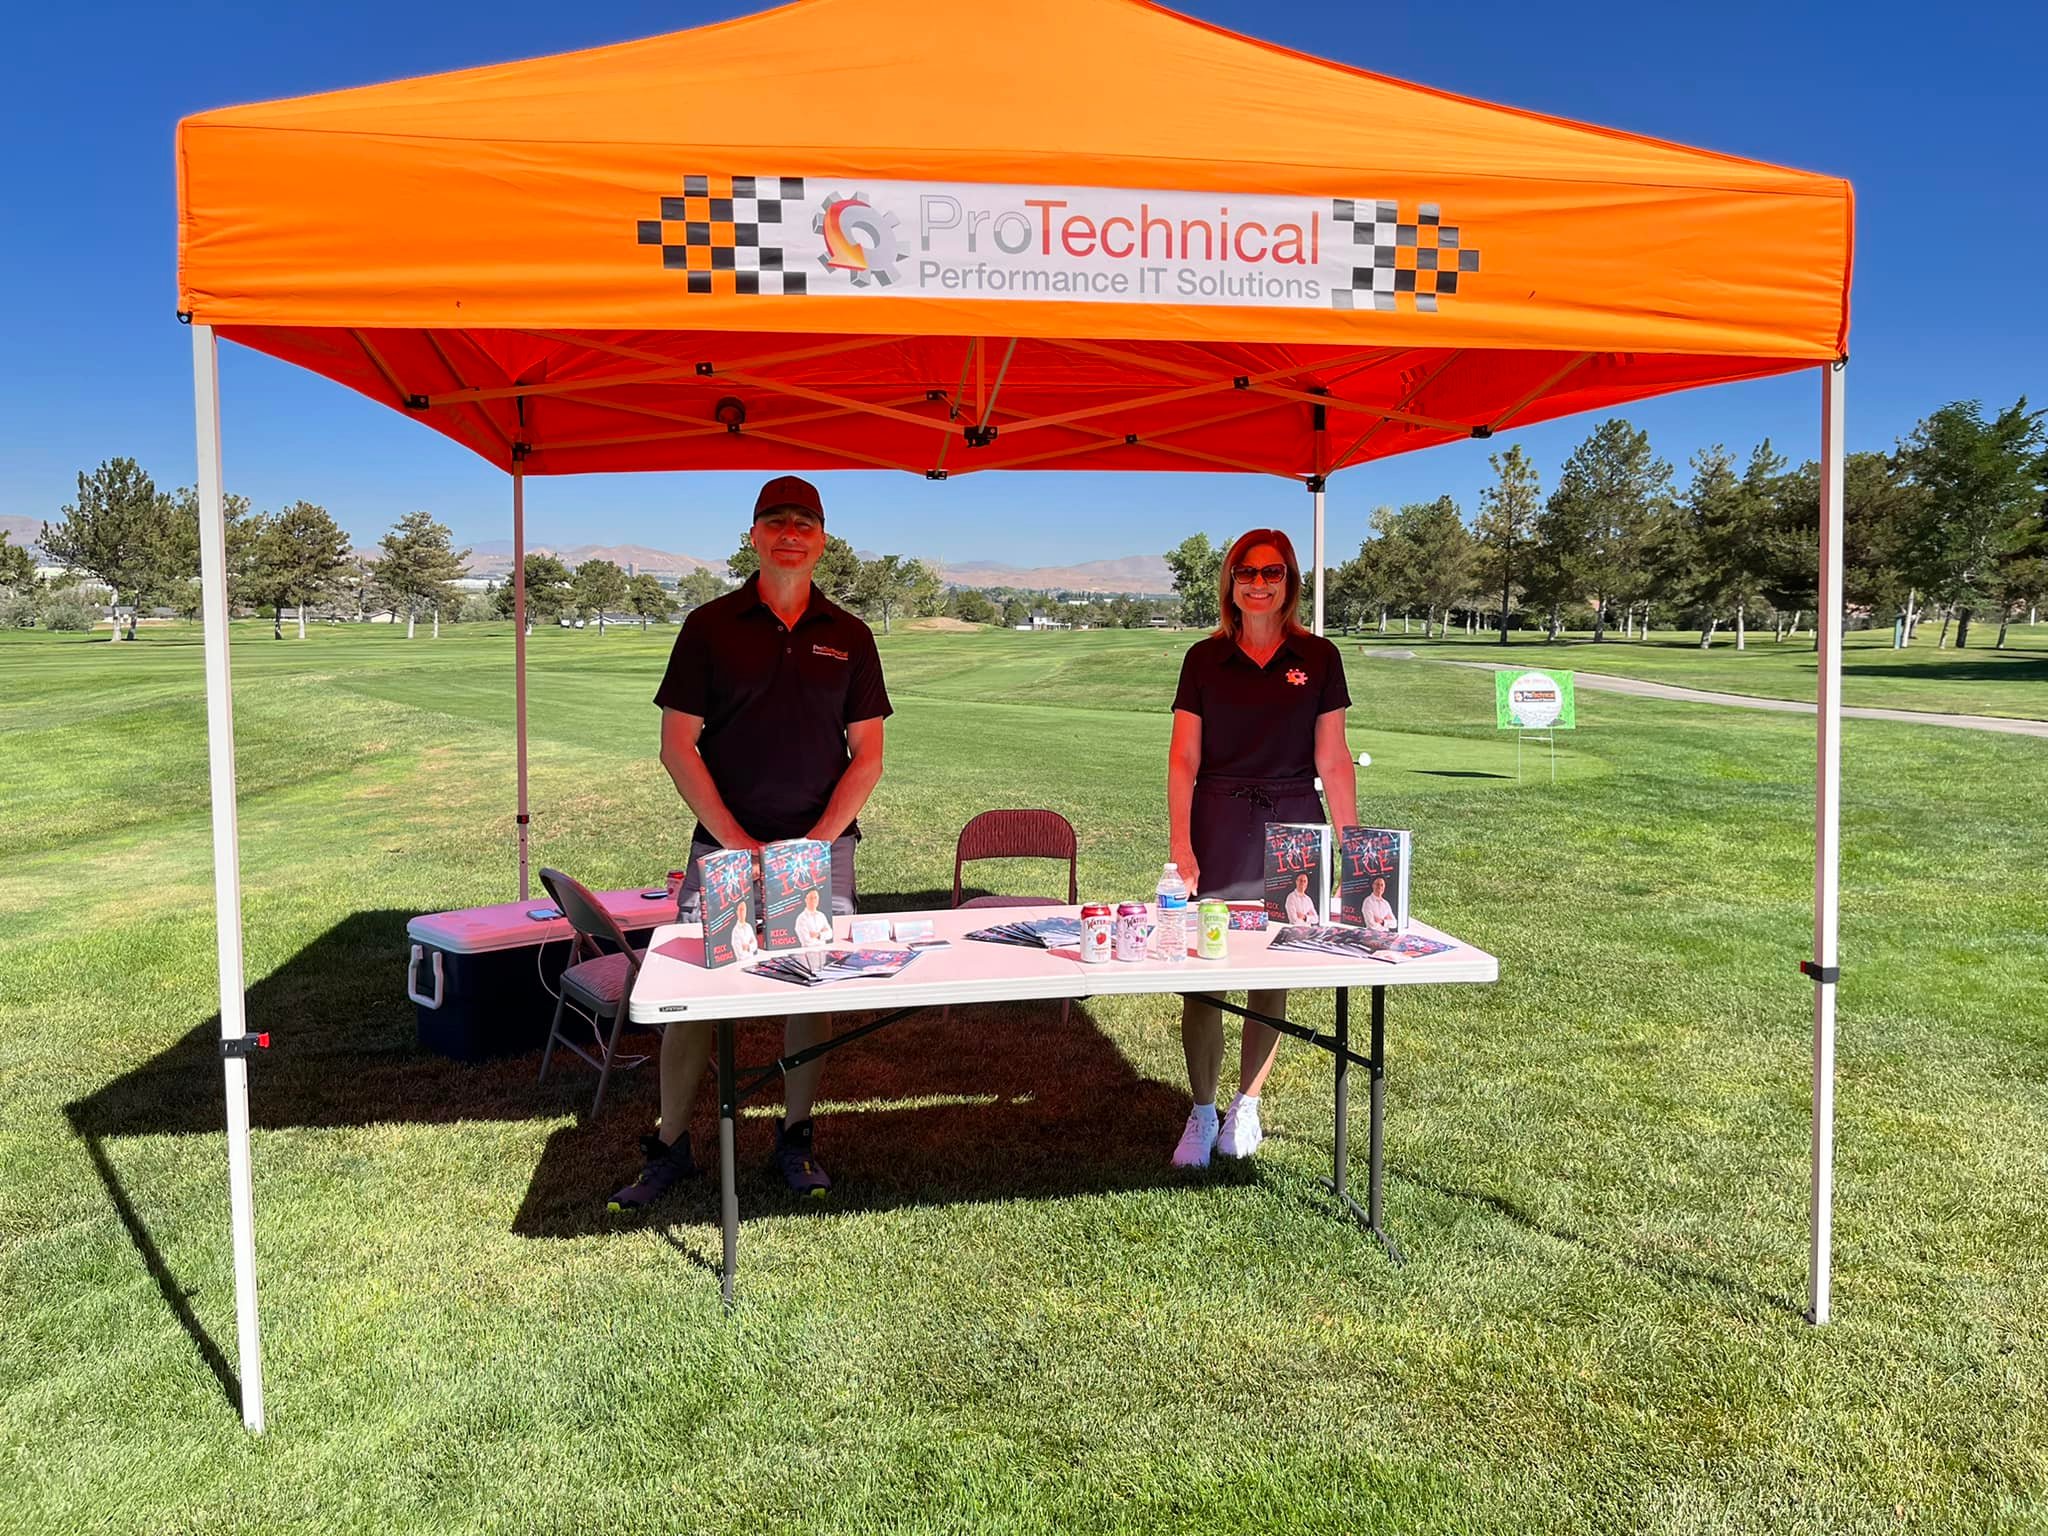 Community: ProTechnical Proudly Sponsors Junior Achievement of Northern Nevada’s 2022 Annual Golf Tournament